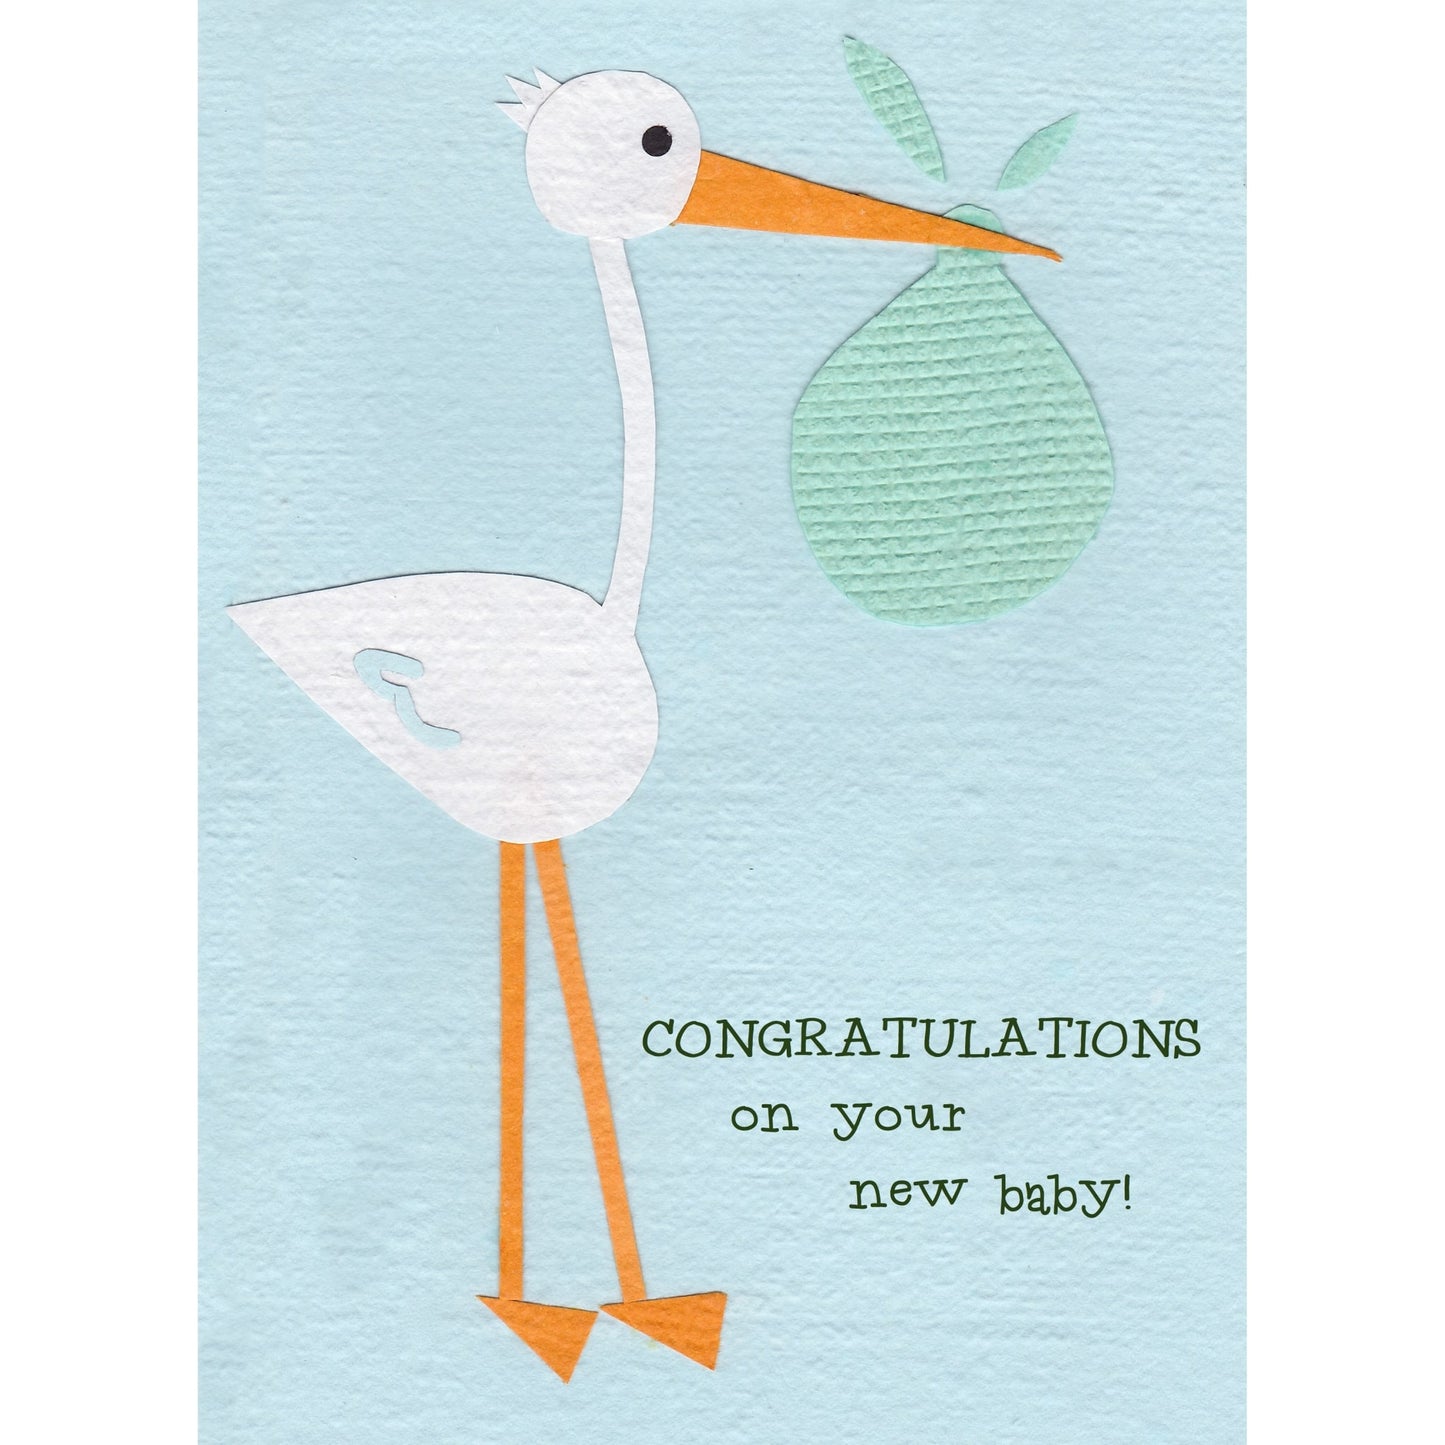 Congratulations stork - handmade and recycled new baby card